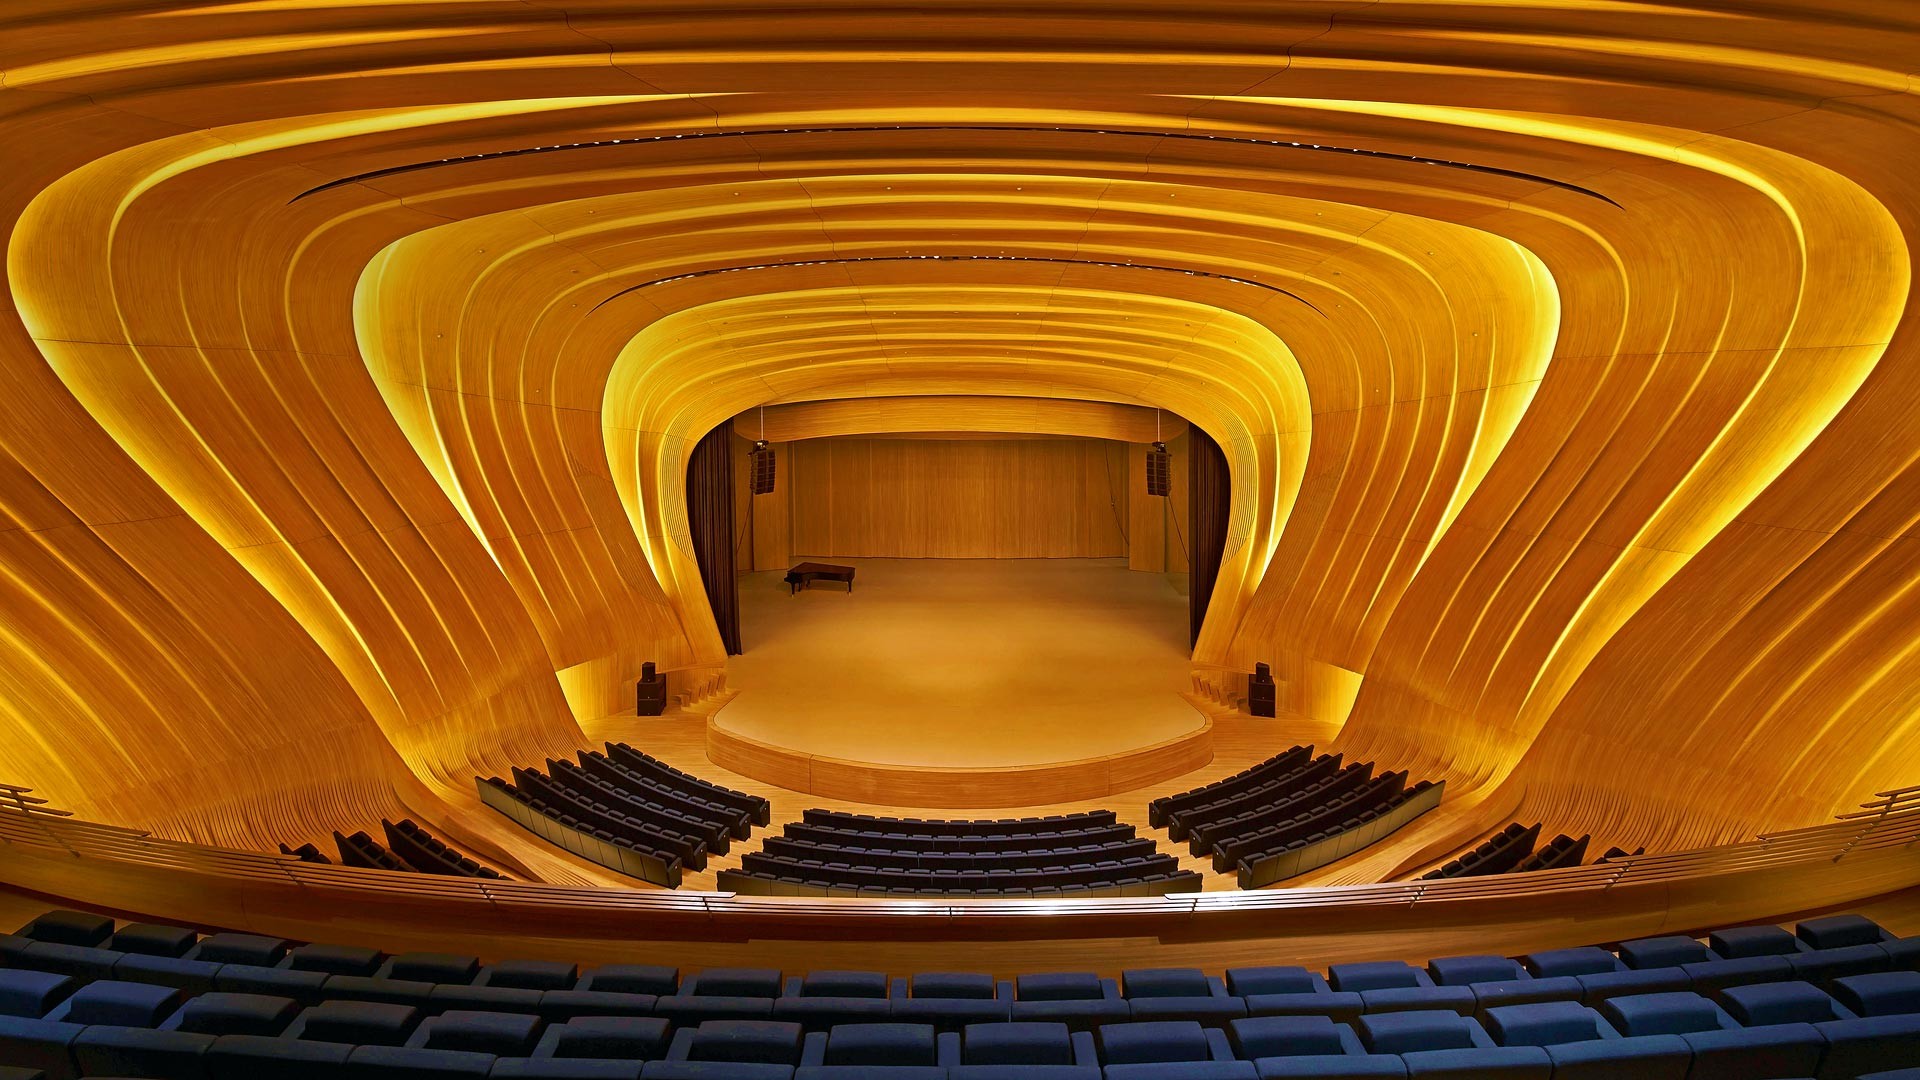 General 1920x1080 symmetry interior modern concert hall Baku Azerbaijan chair podiums stages lights piano wooden surface yellow warm colors